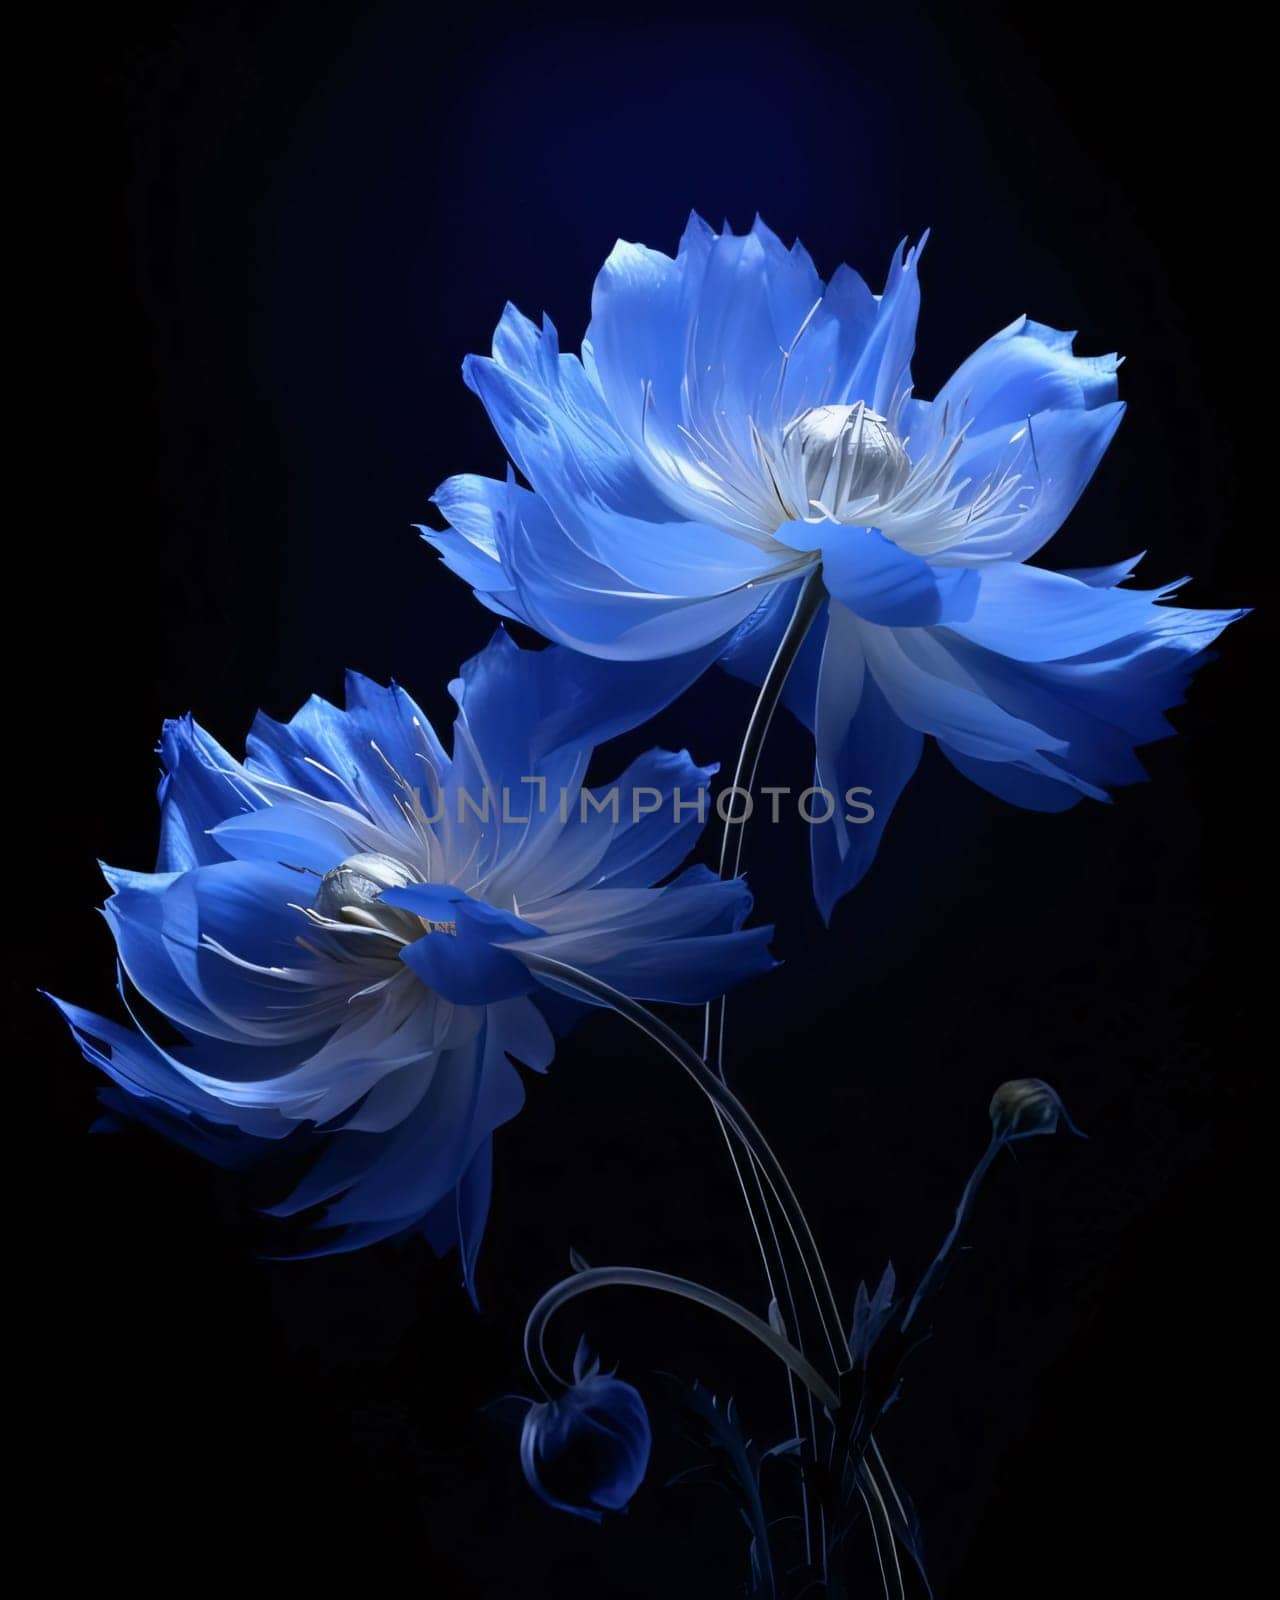 Two blue flowers on a dark black background. Flowering flowers, a symbol of spring, new life. A joyful time of nature waking up to life.